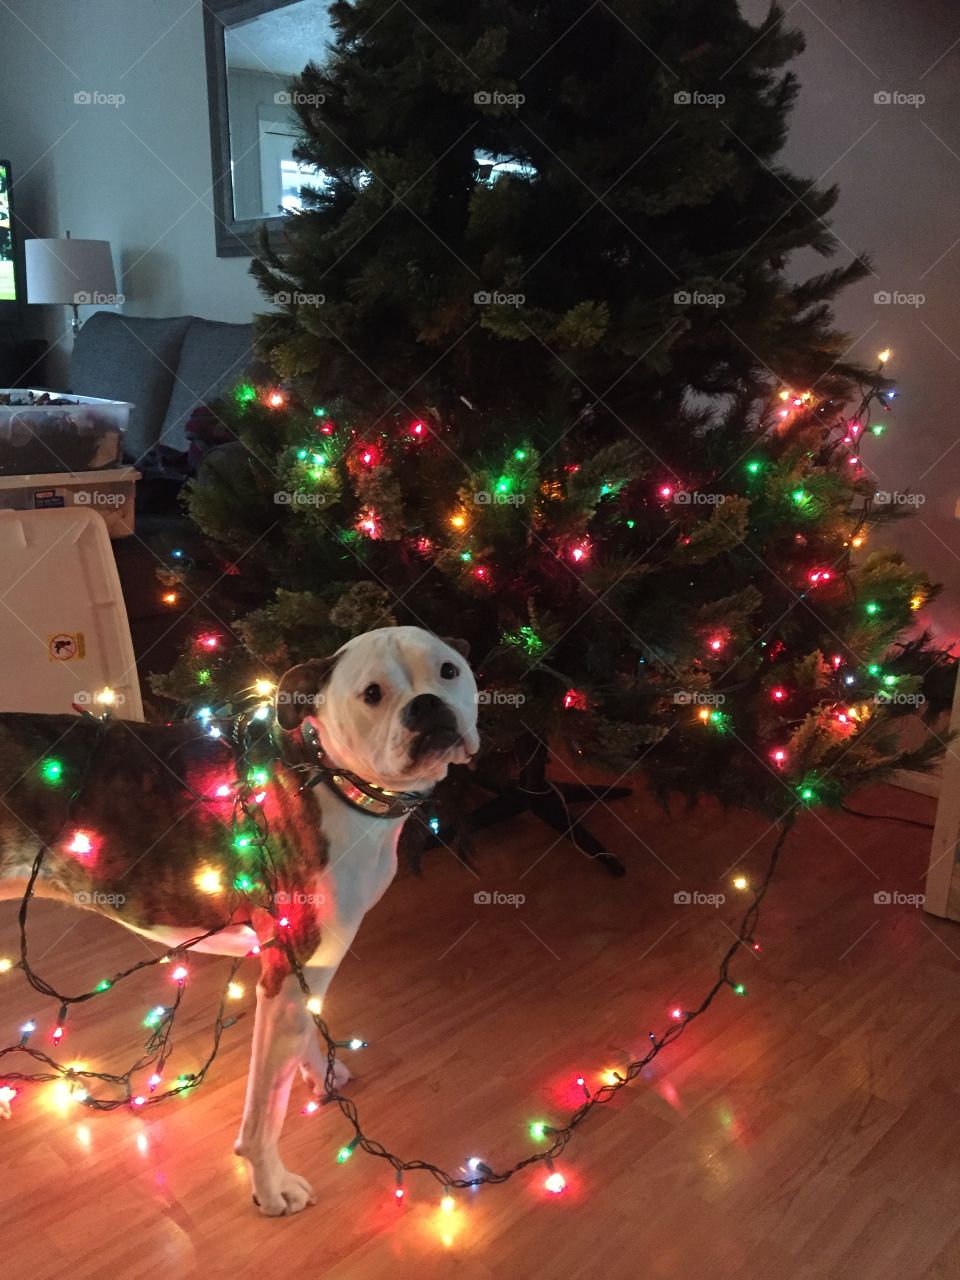 This is Martha helping decorate the Christmas tree.